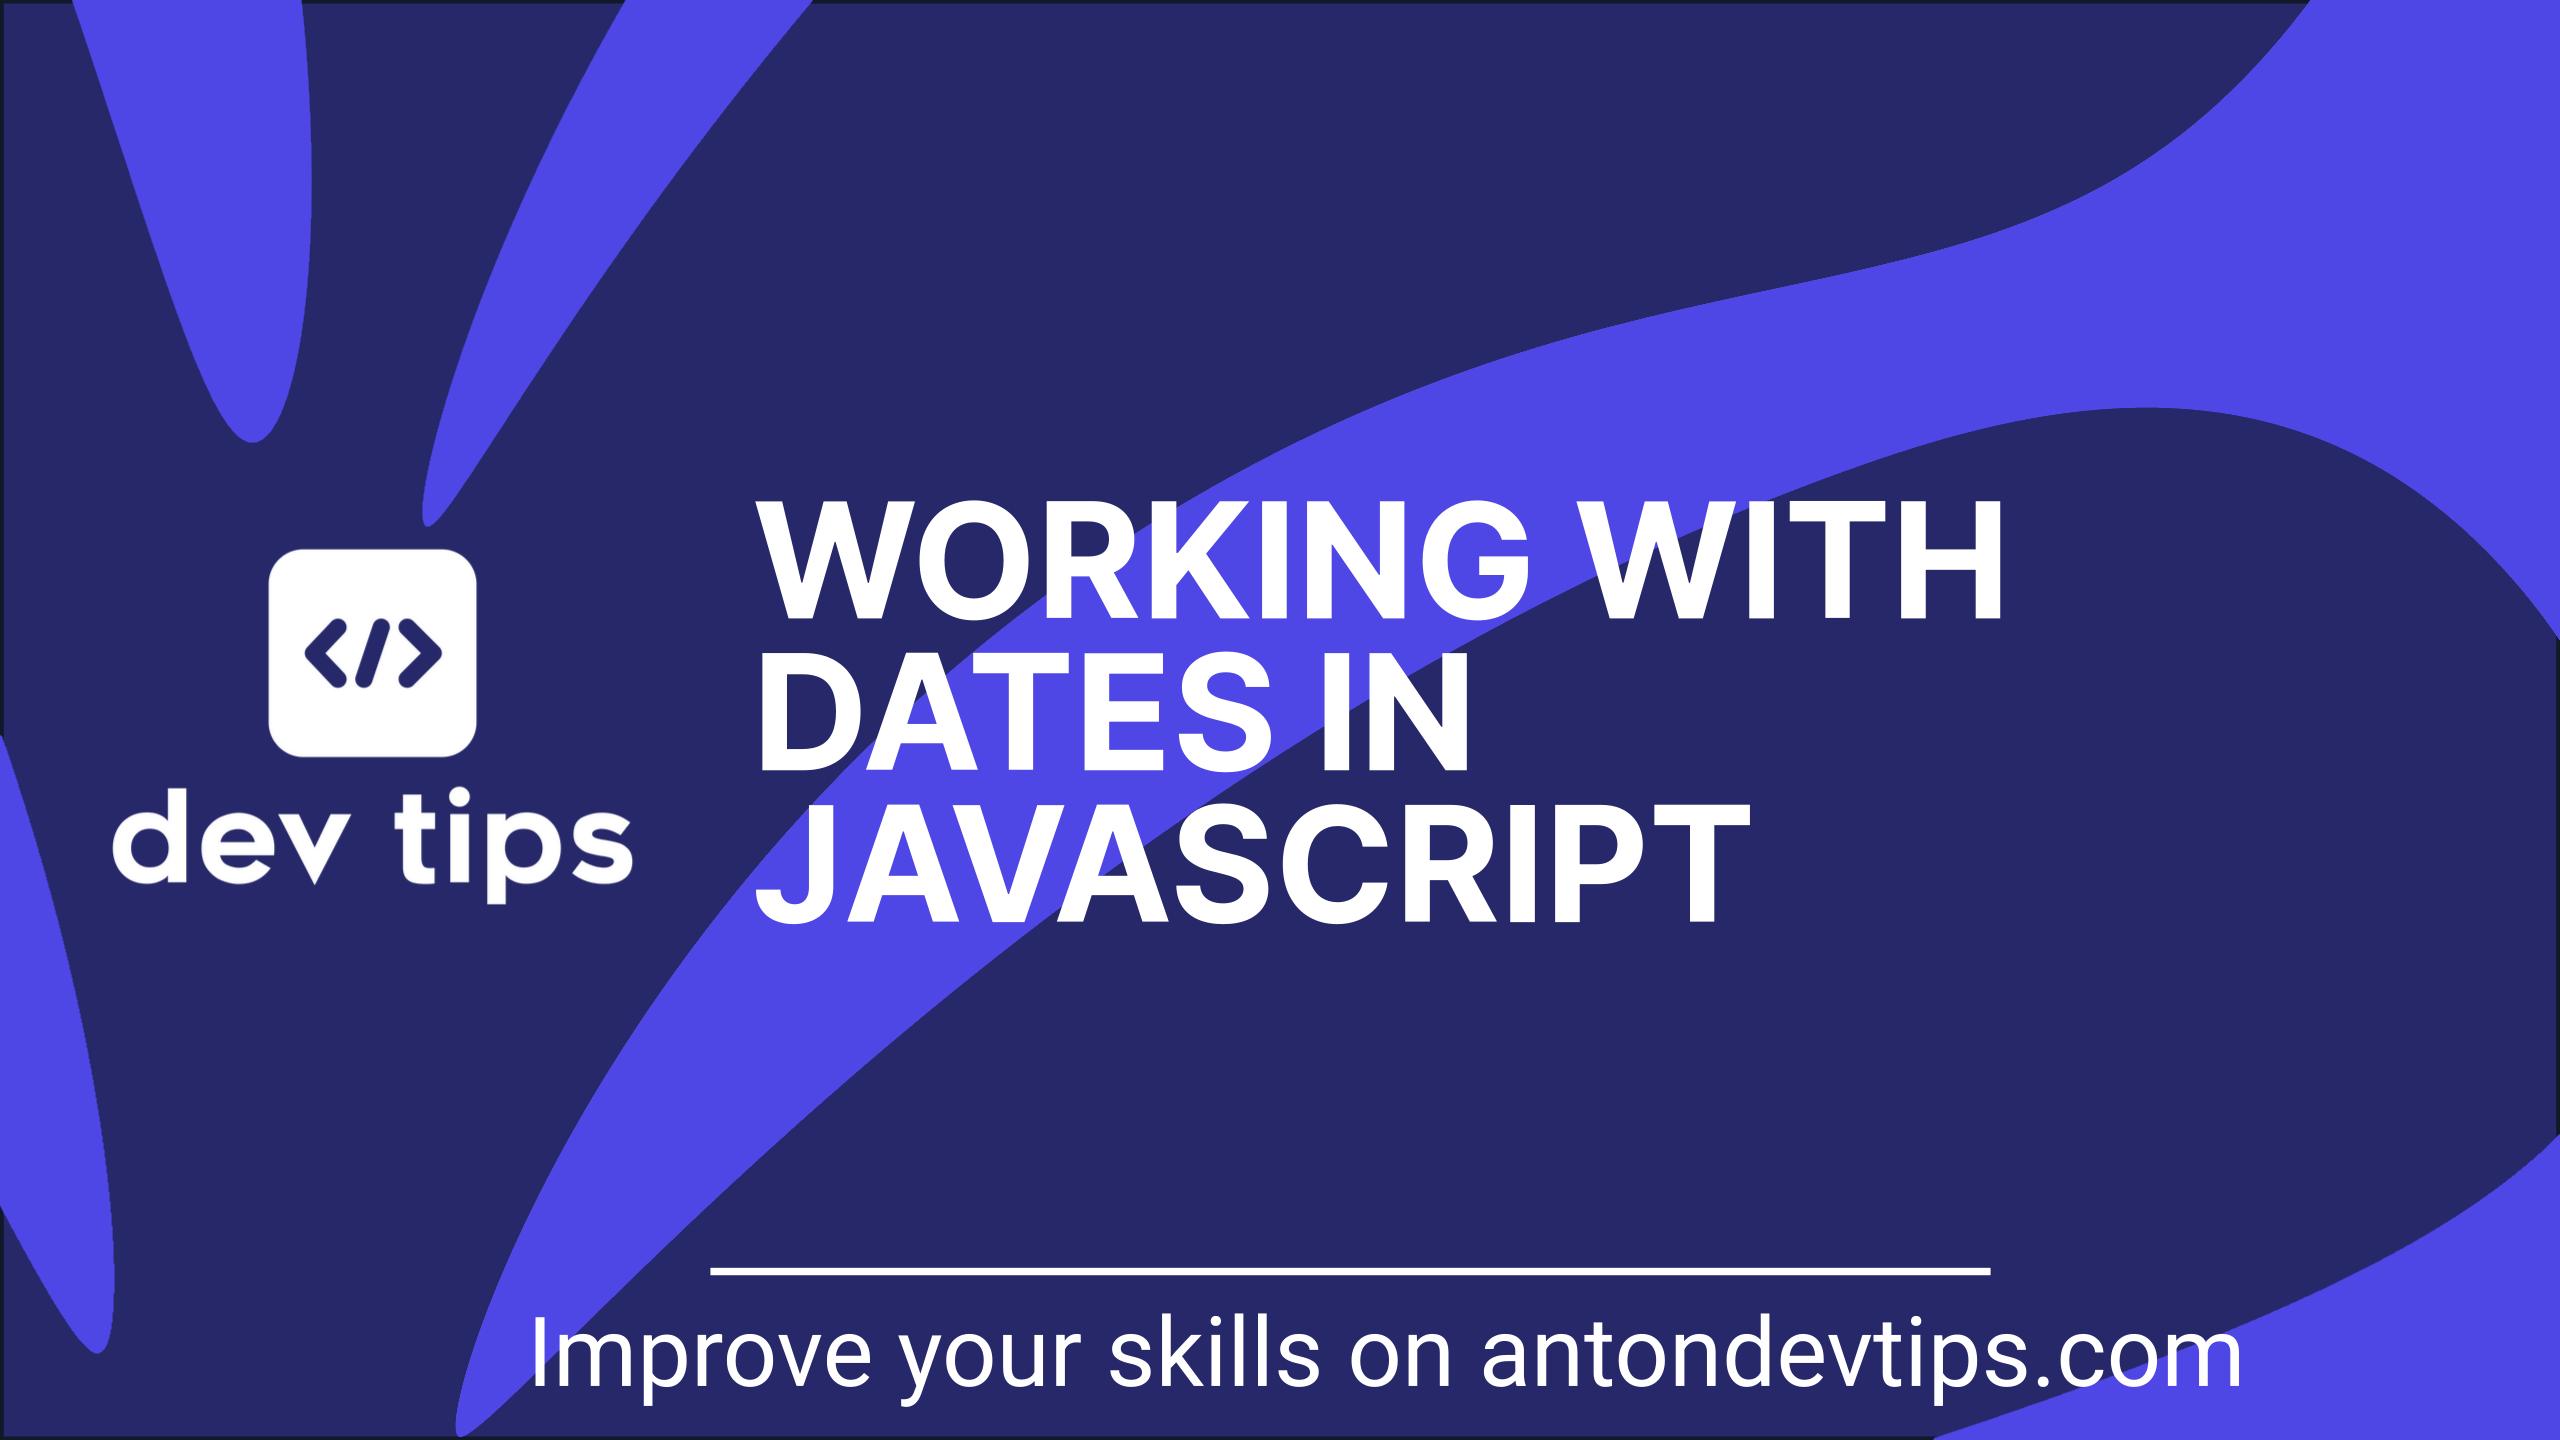 Working with Dates in JavaScript